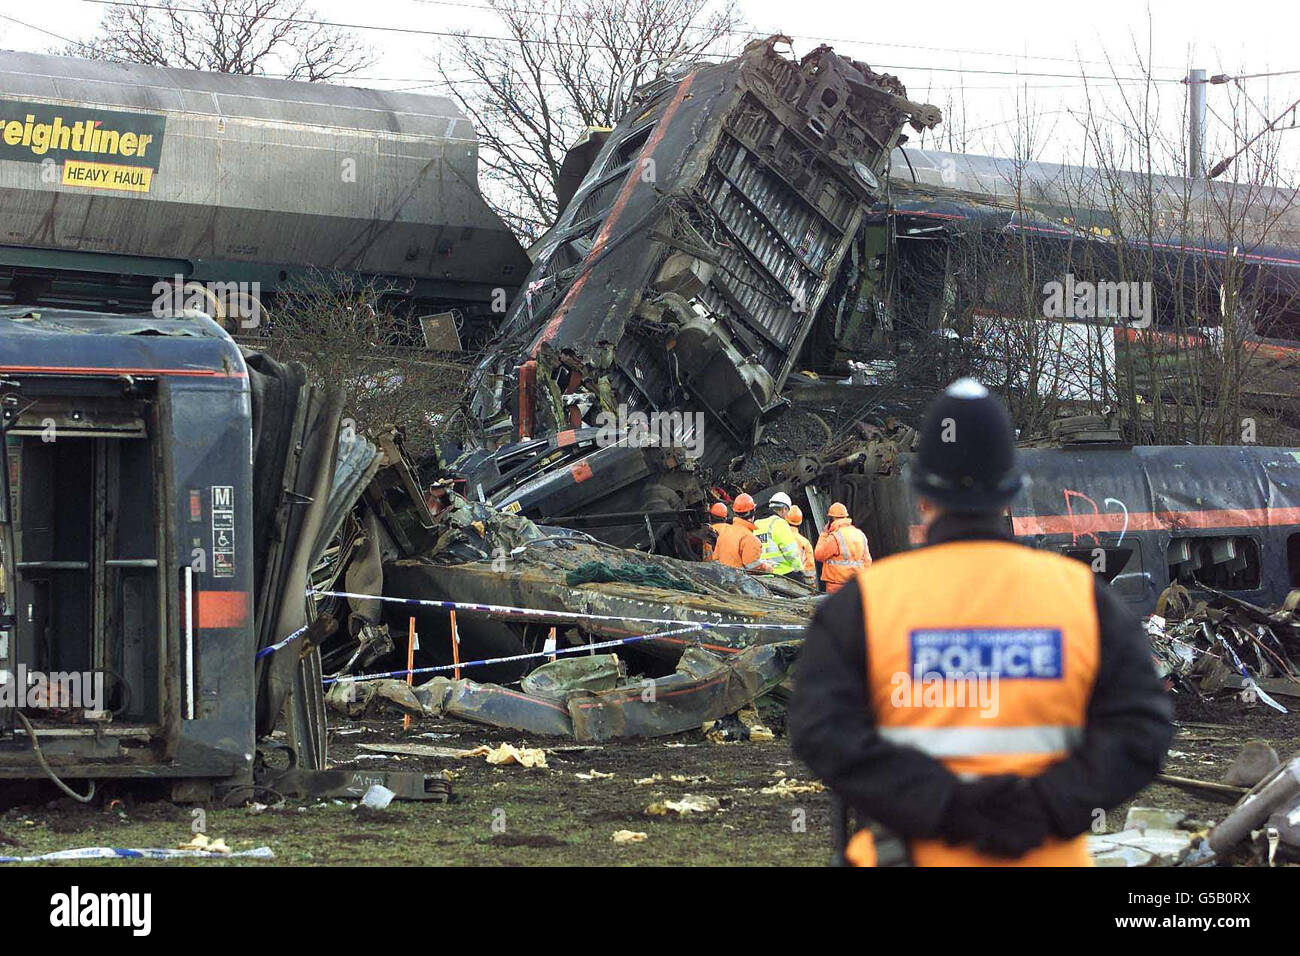 Emergency workers carry out a search and begin to remove personal belongings, at the scene at Great Heck, nr Selby, Yorkshire, where work is continuing following the railway crash in which 13 people are thought to have died. However, police have warned that more bodies may be recovered as the process of lifting the wrecked carriage begins. Stock Photo